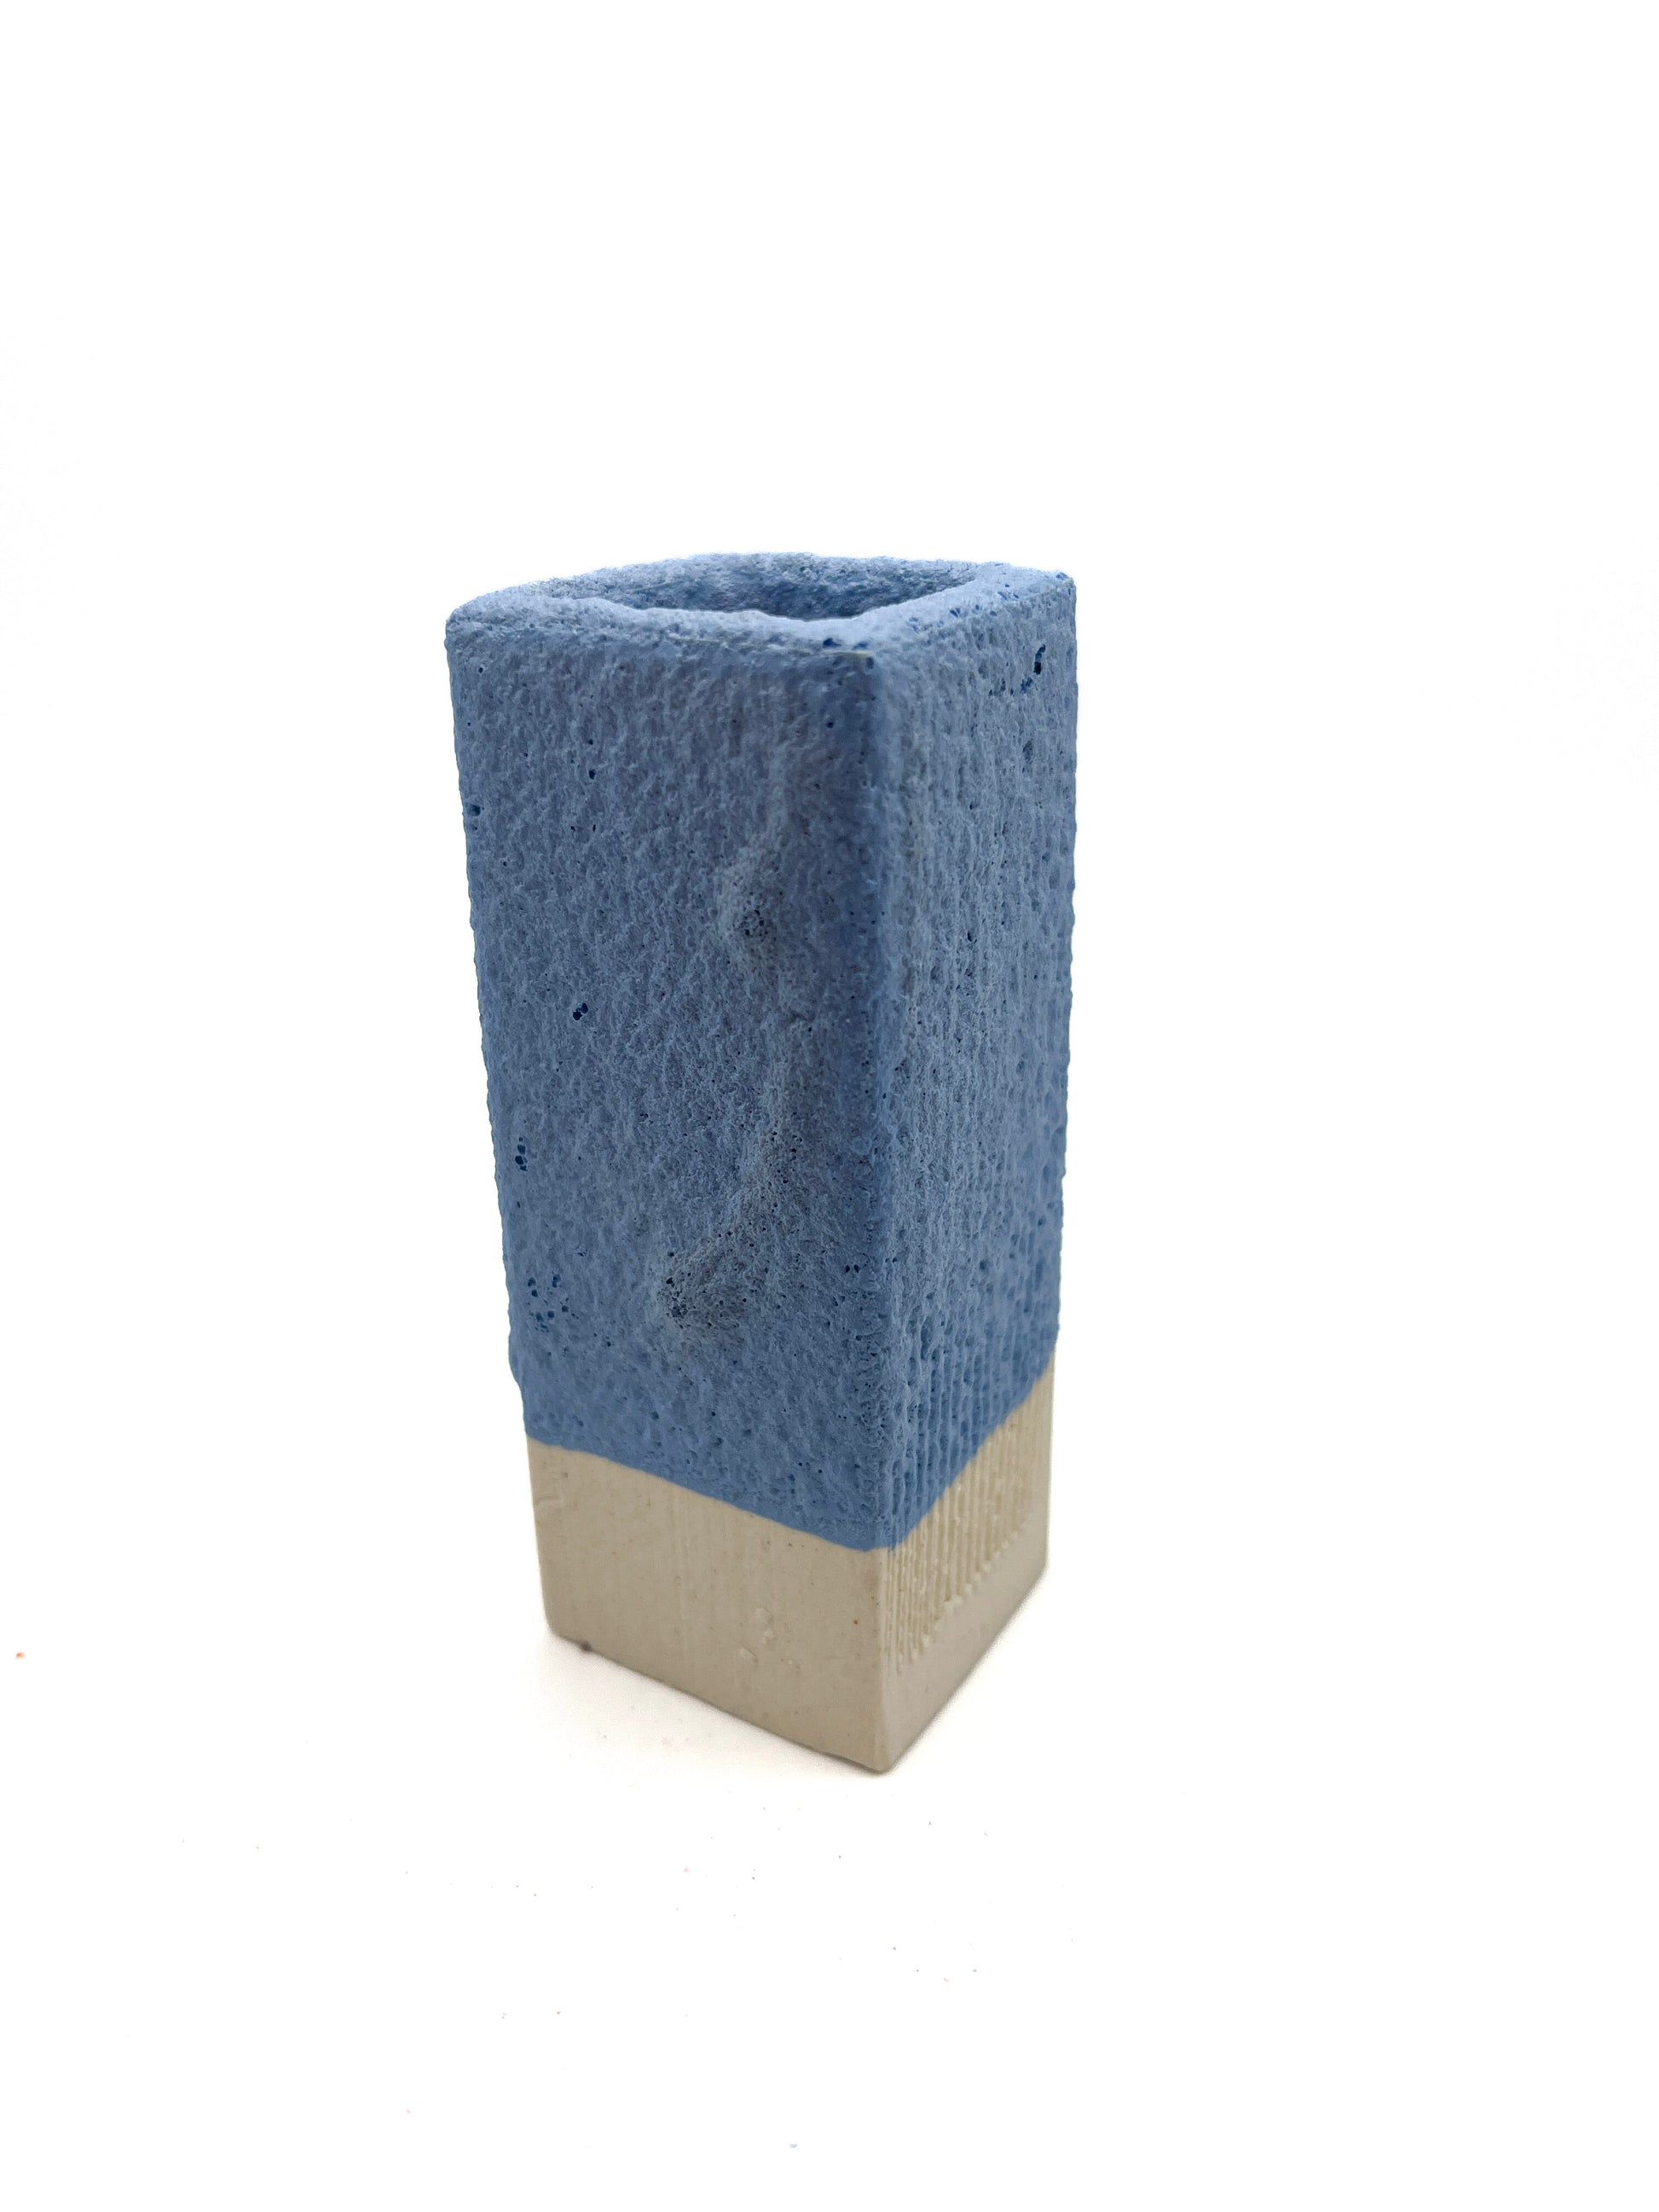 Fired test column for blue mini-puff glaze on light clay. Fuzzy texture when fired to cone 5 or 6.